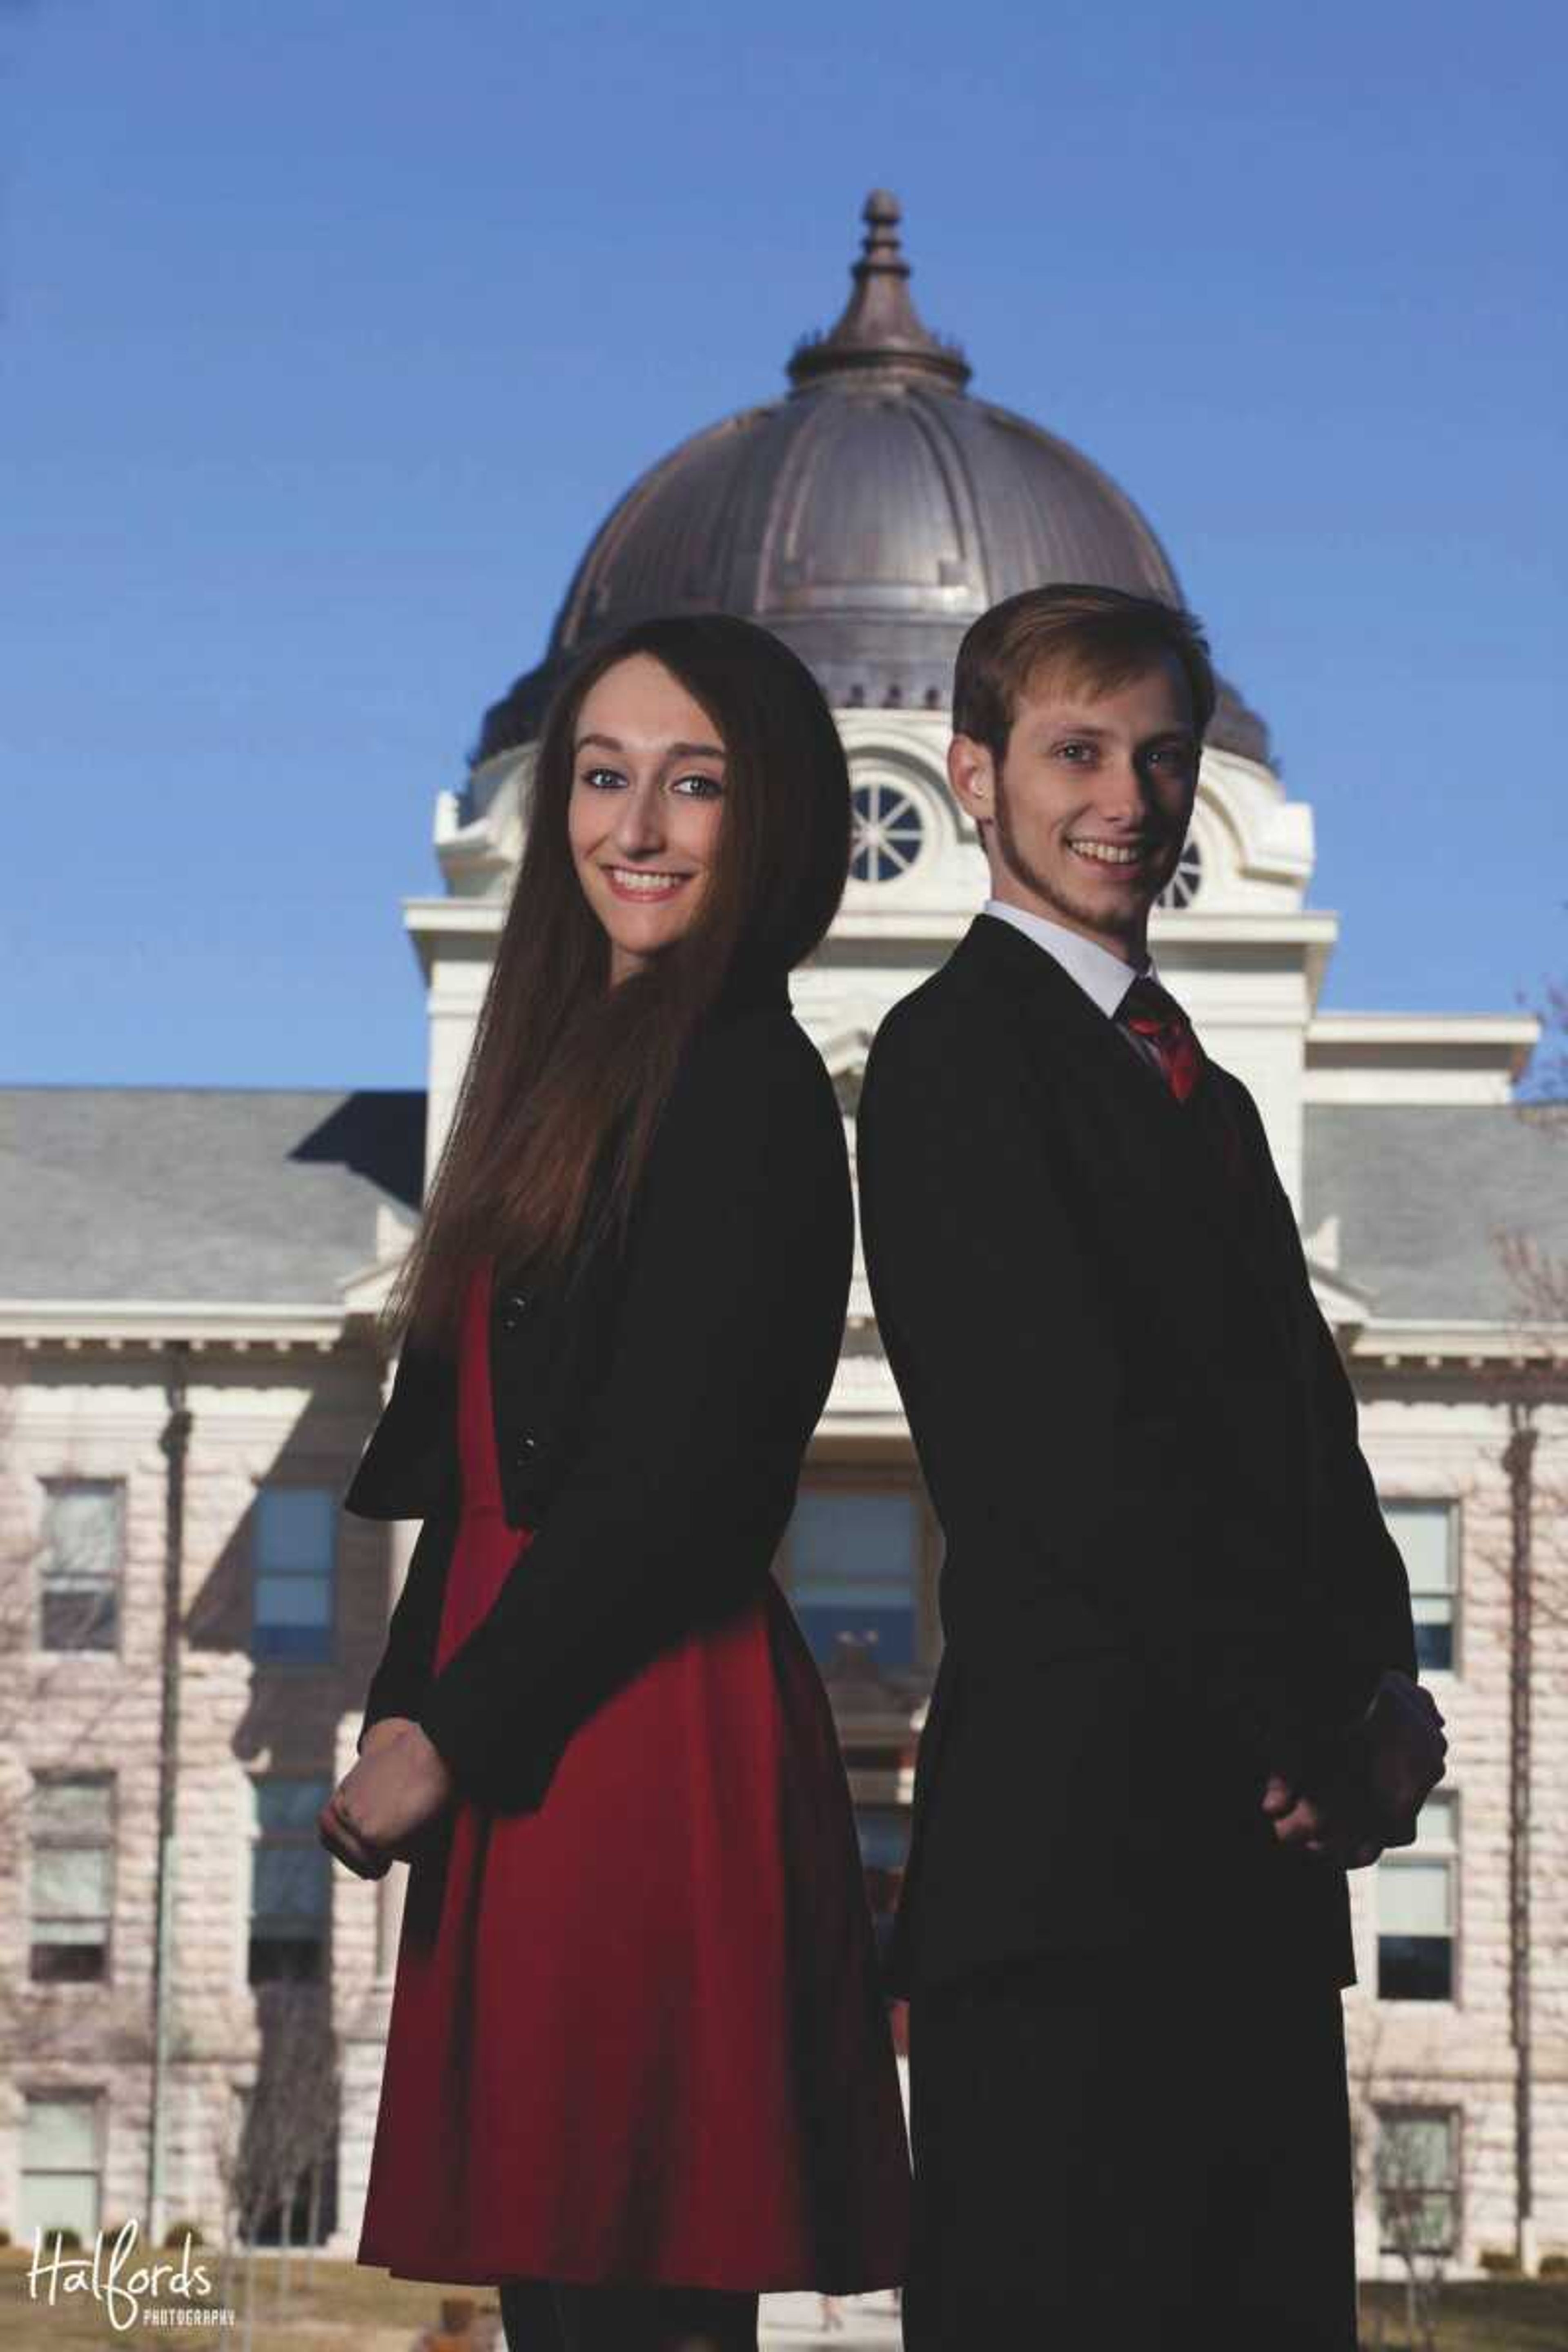 Mogley, Kennedy win top student government positions